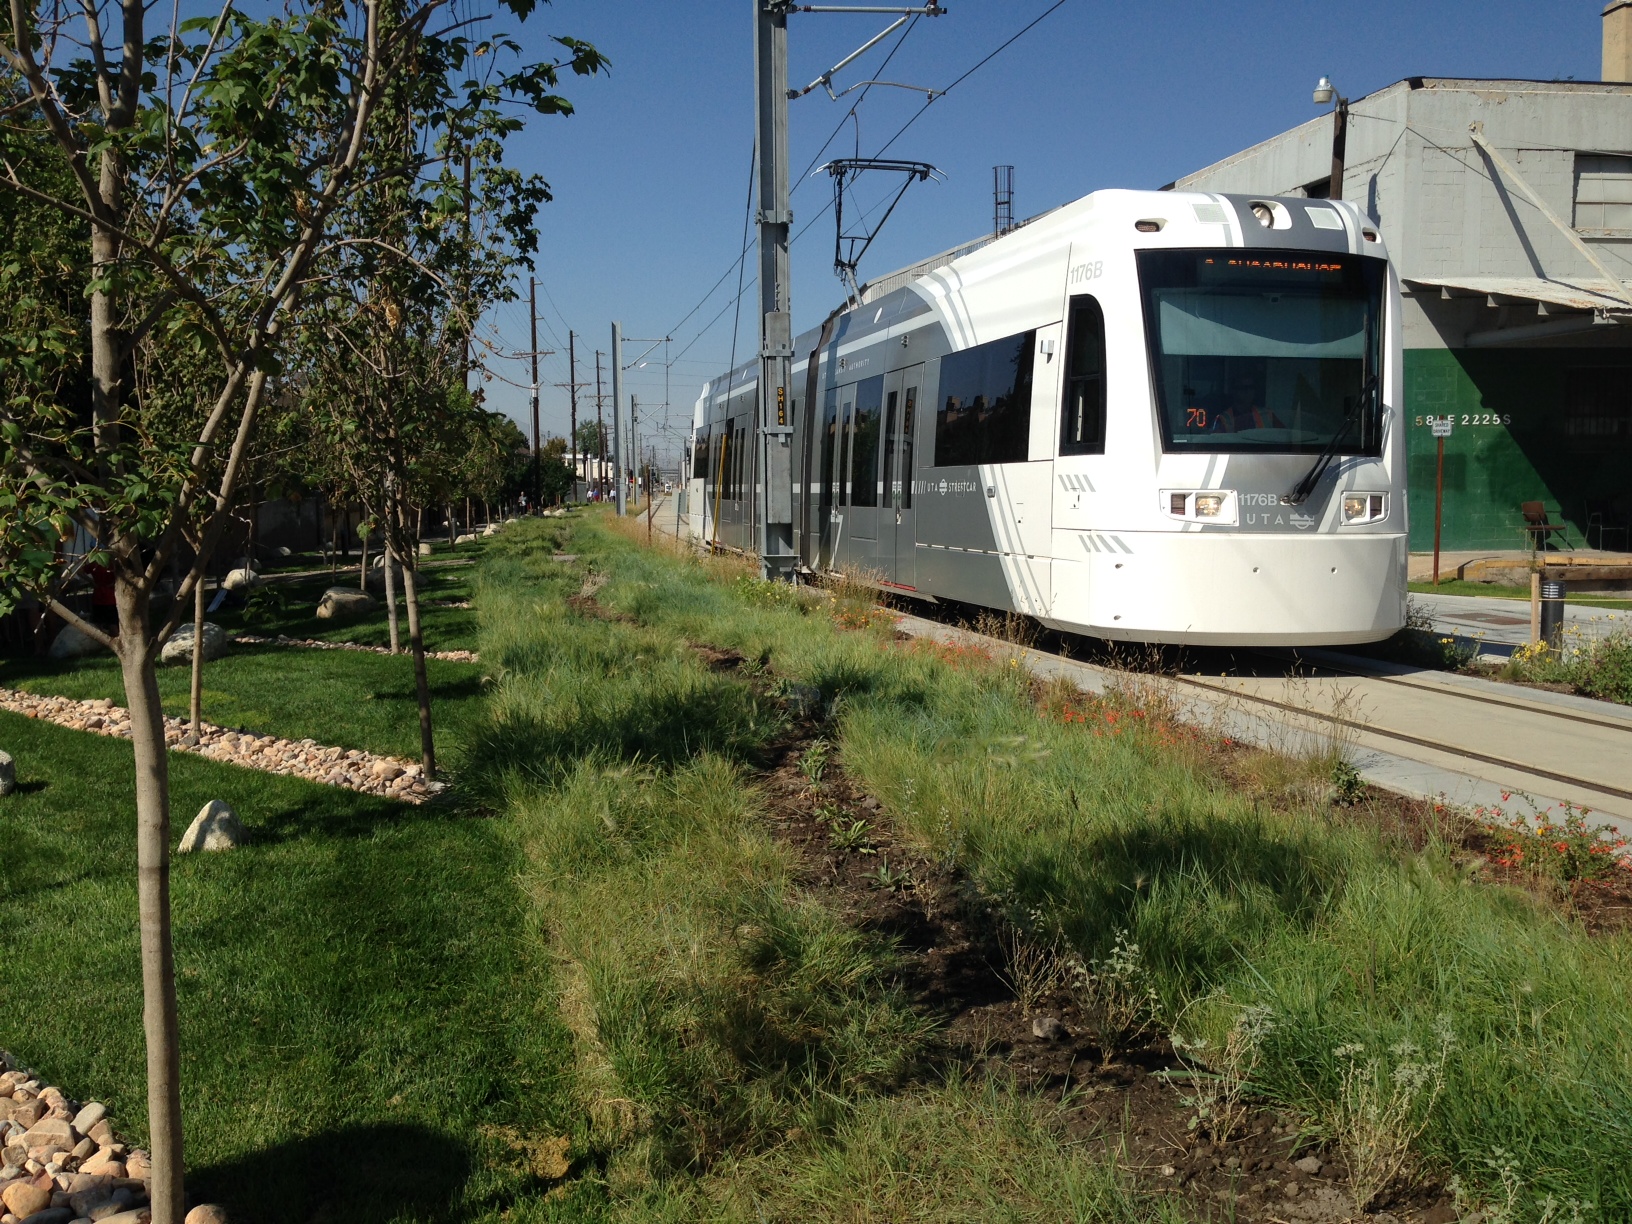 An S-Line streetcar passes due east near the 600 E crossing on September 19, 2014.